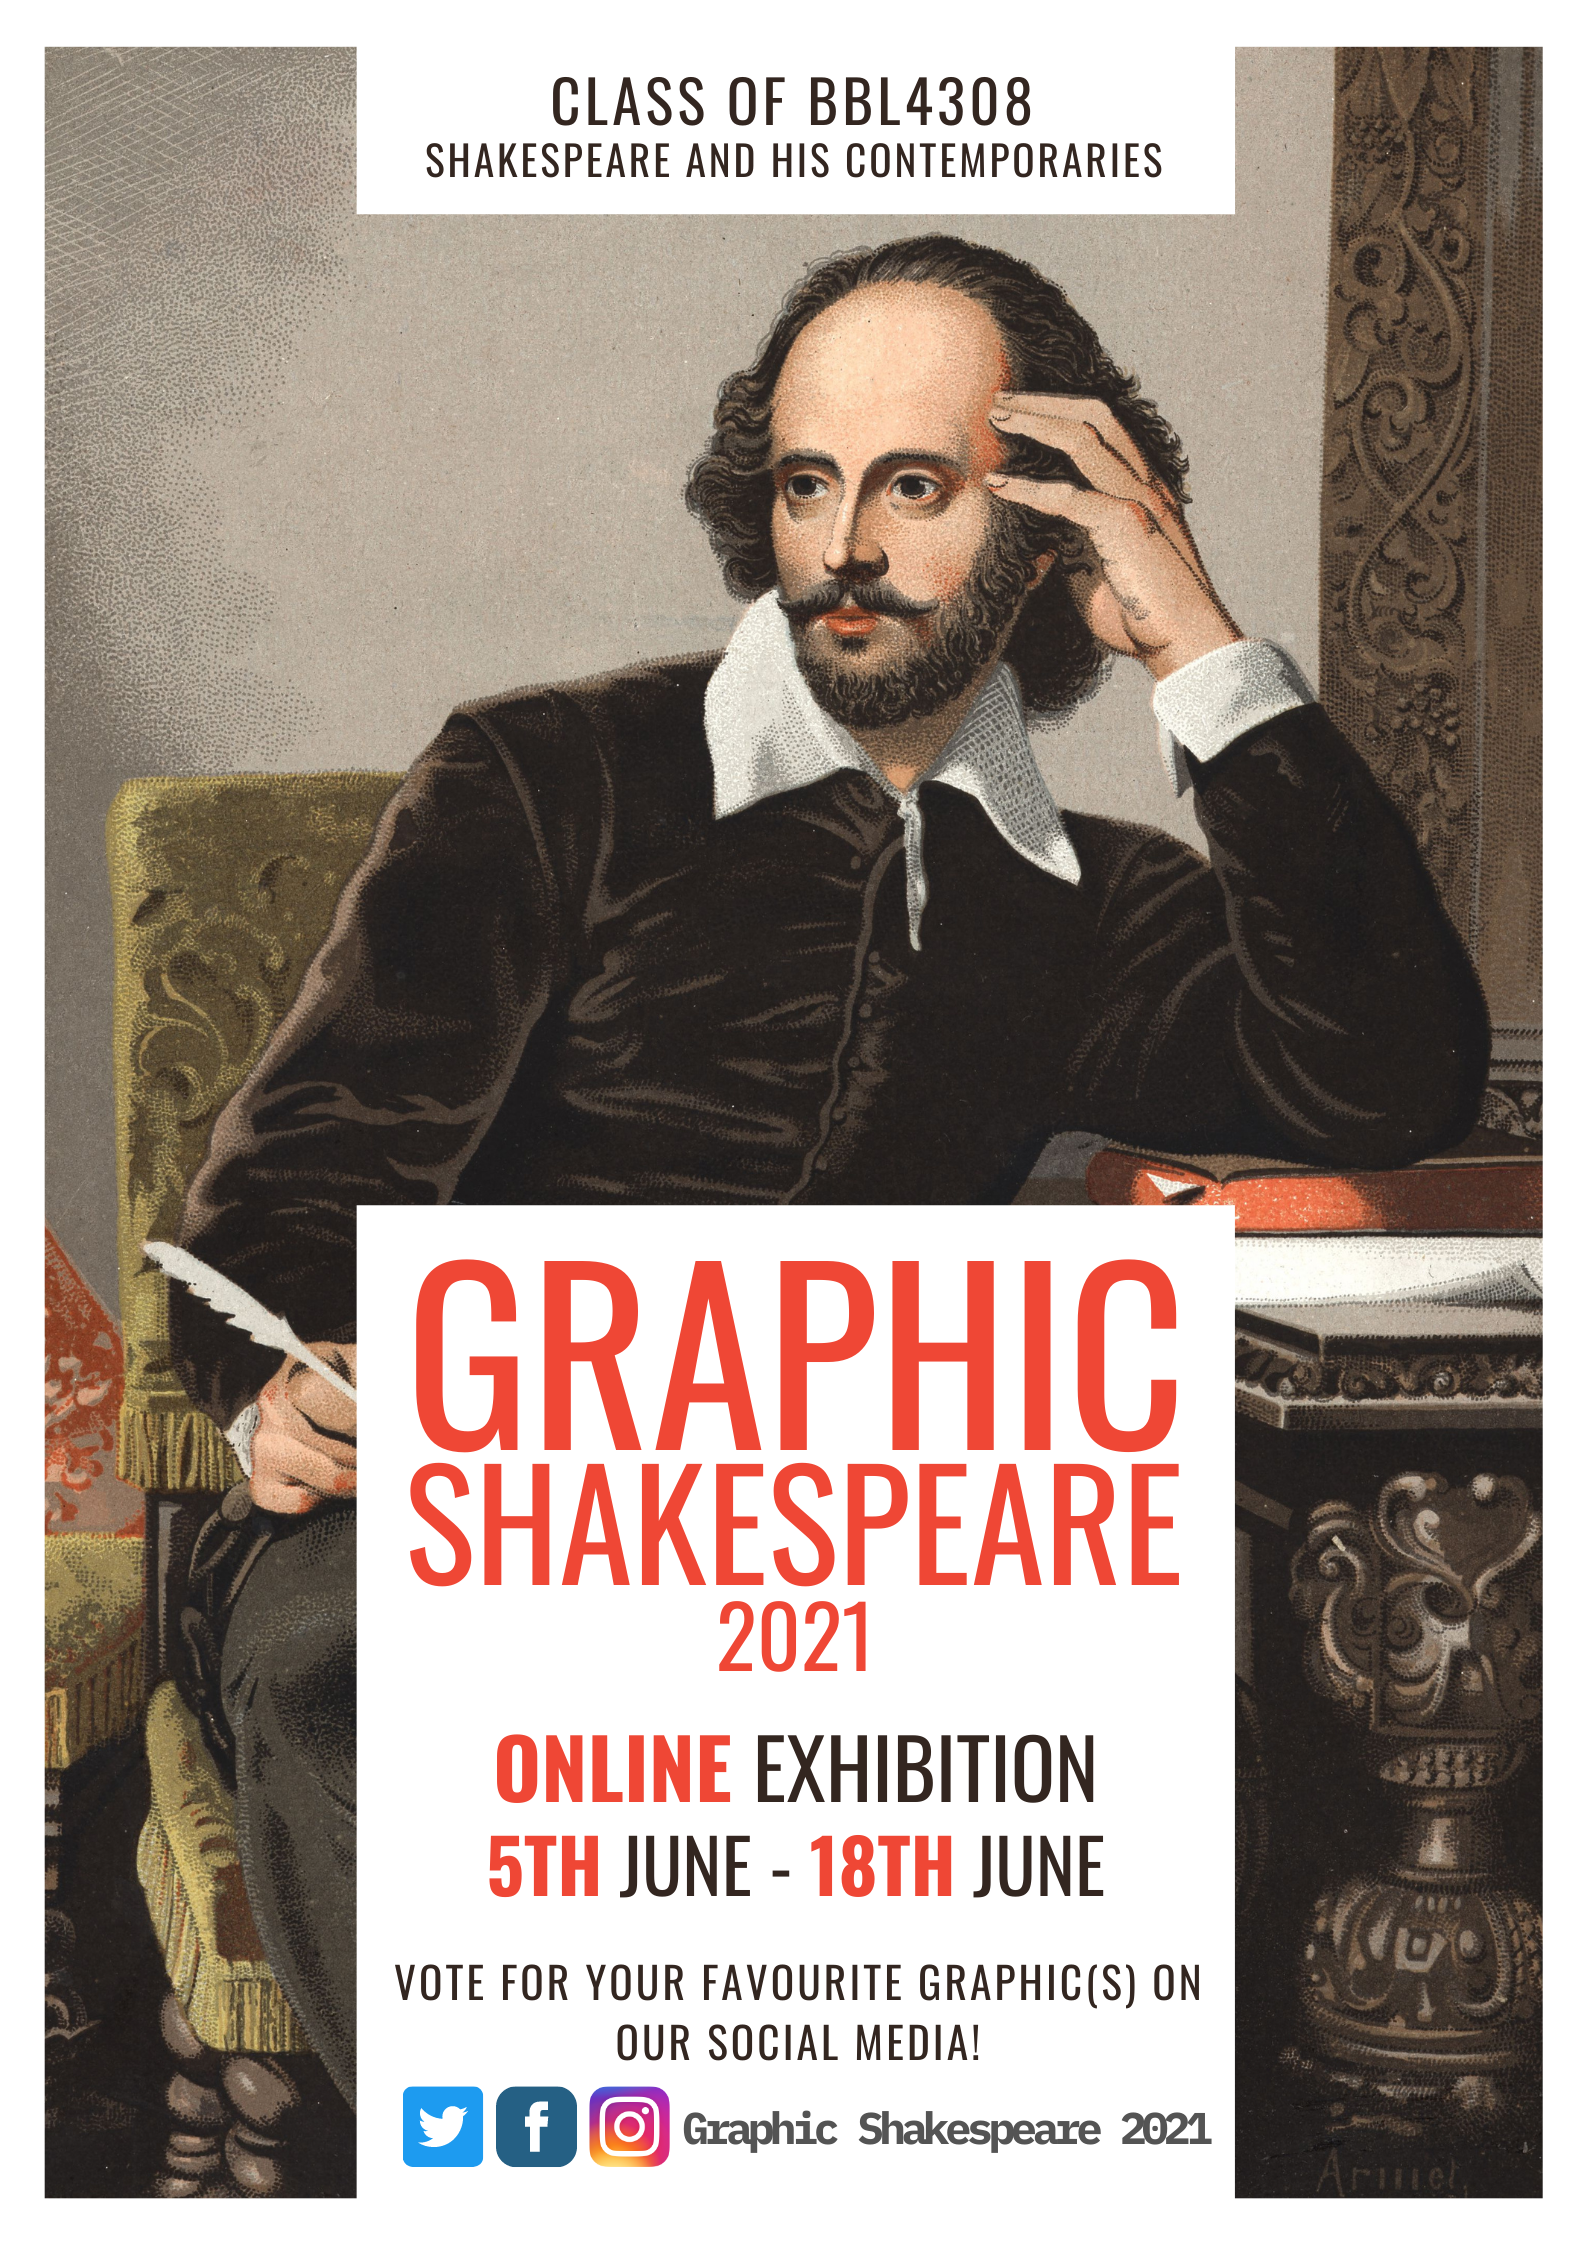 An online exhibition to appreciate the works of William Shakespeare, as well as showcase the students' talents in interpreting his works.